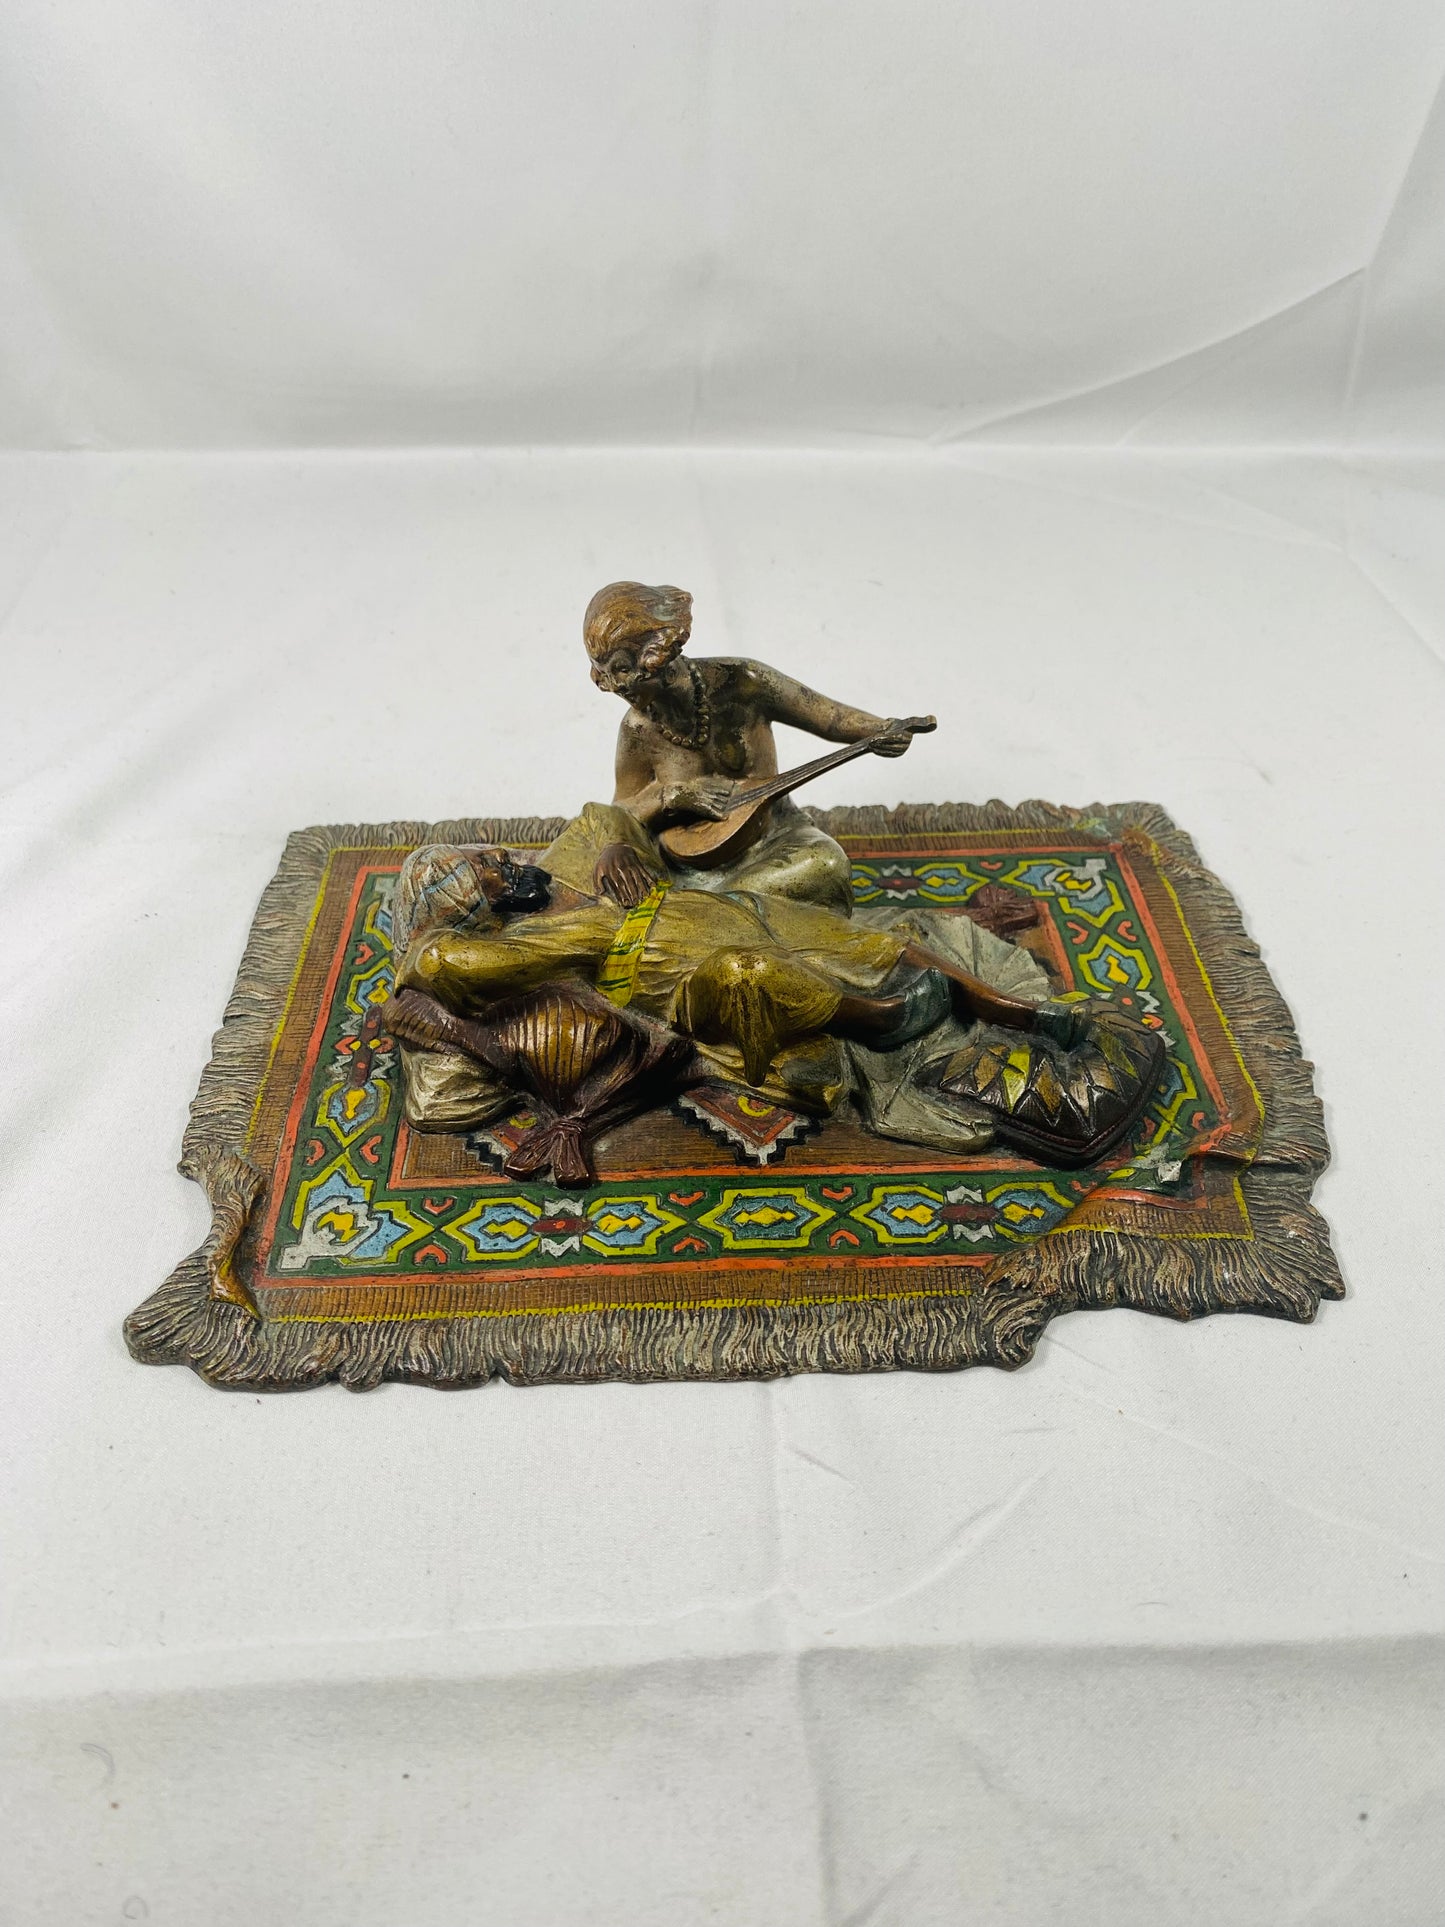 Viennese Cold Painted Erotic Bronze of Man and Female Musician on Carpet, Moorish / Oriental Style c. 1910. Attributed to Franz Bergman.